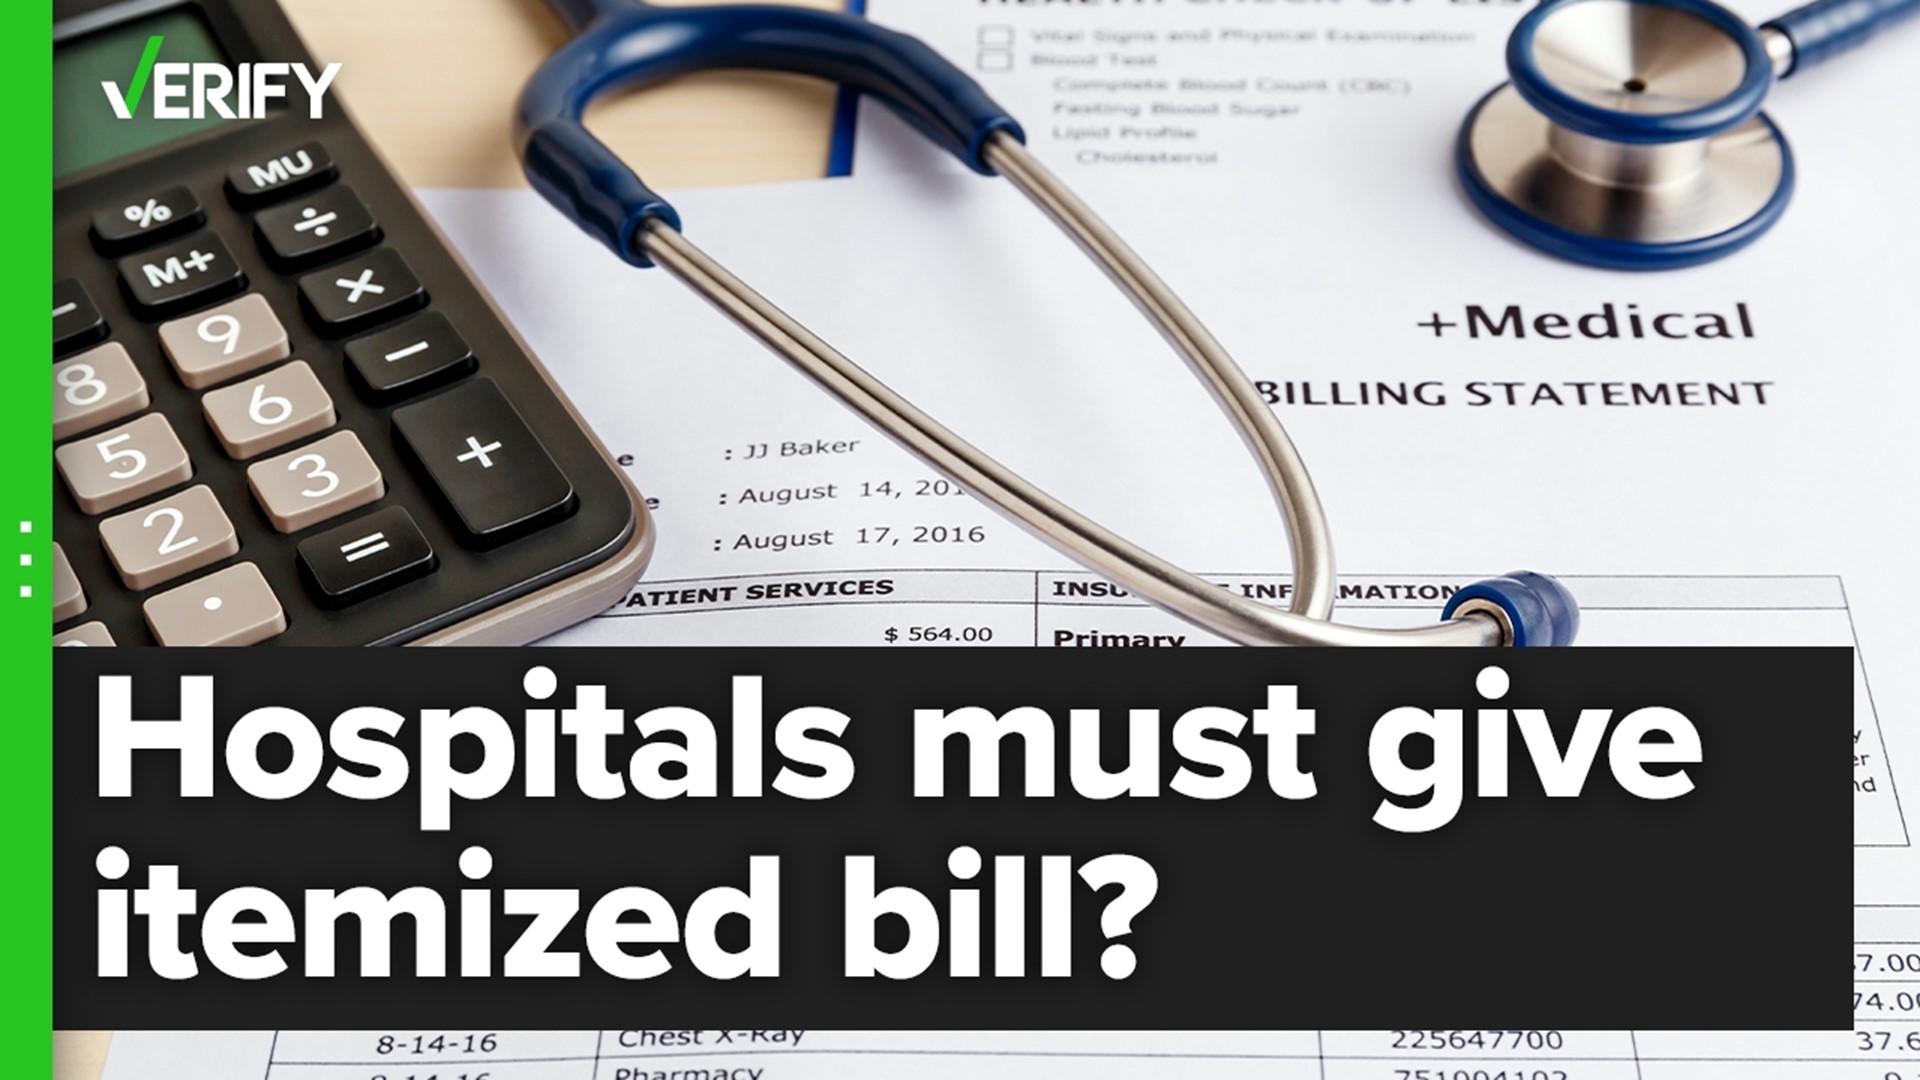 A viral social media video claims hospitals are required to provide an itemized bill upon request. But this requirement varies from state to state and by hospital.